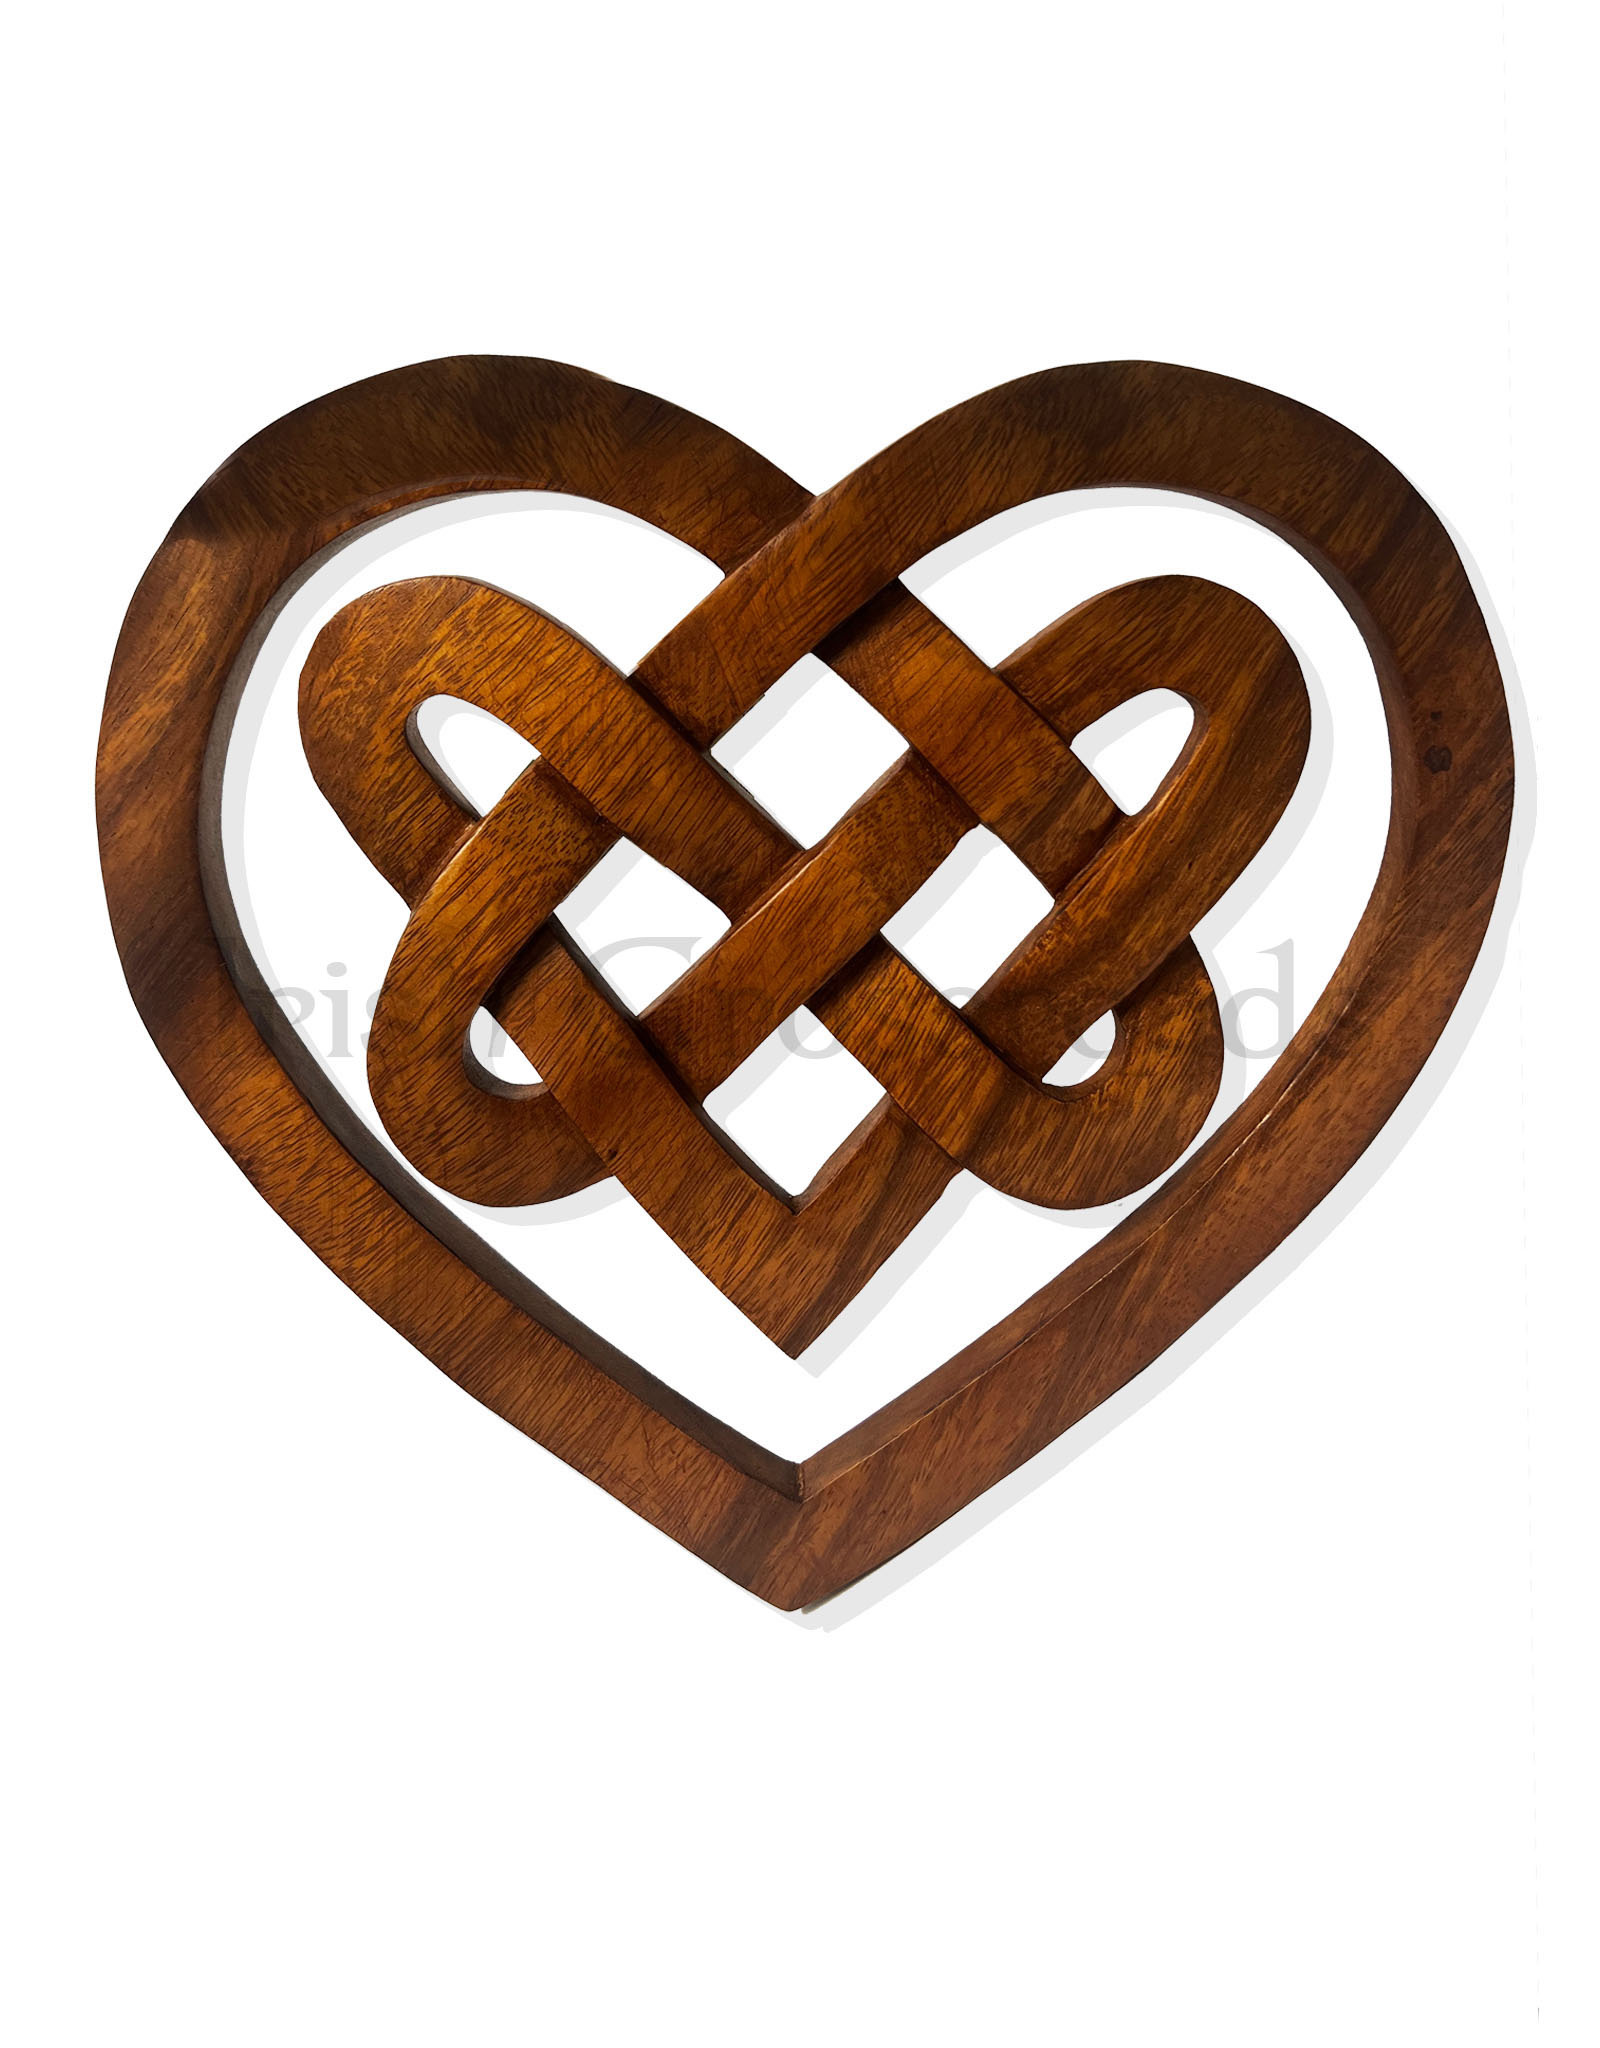 Intertwined Hearts Wood Carving Pattern and Template Available